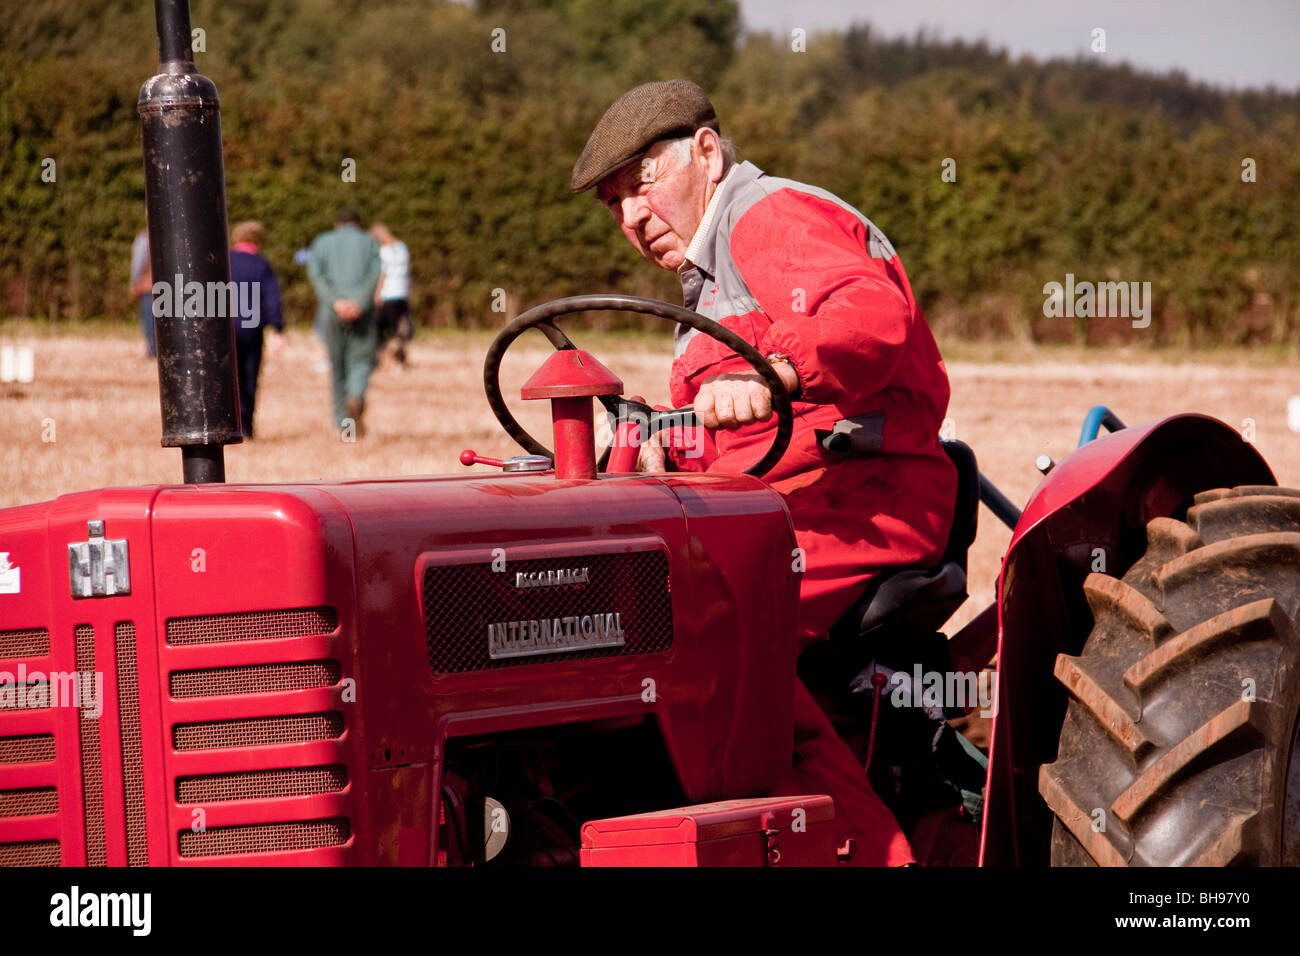 Man ploughing on tractor in paddock Stock Photo